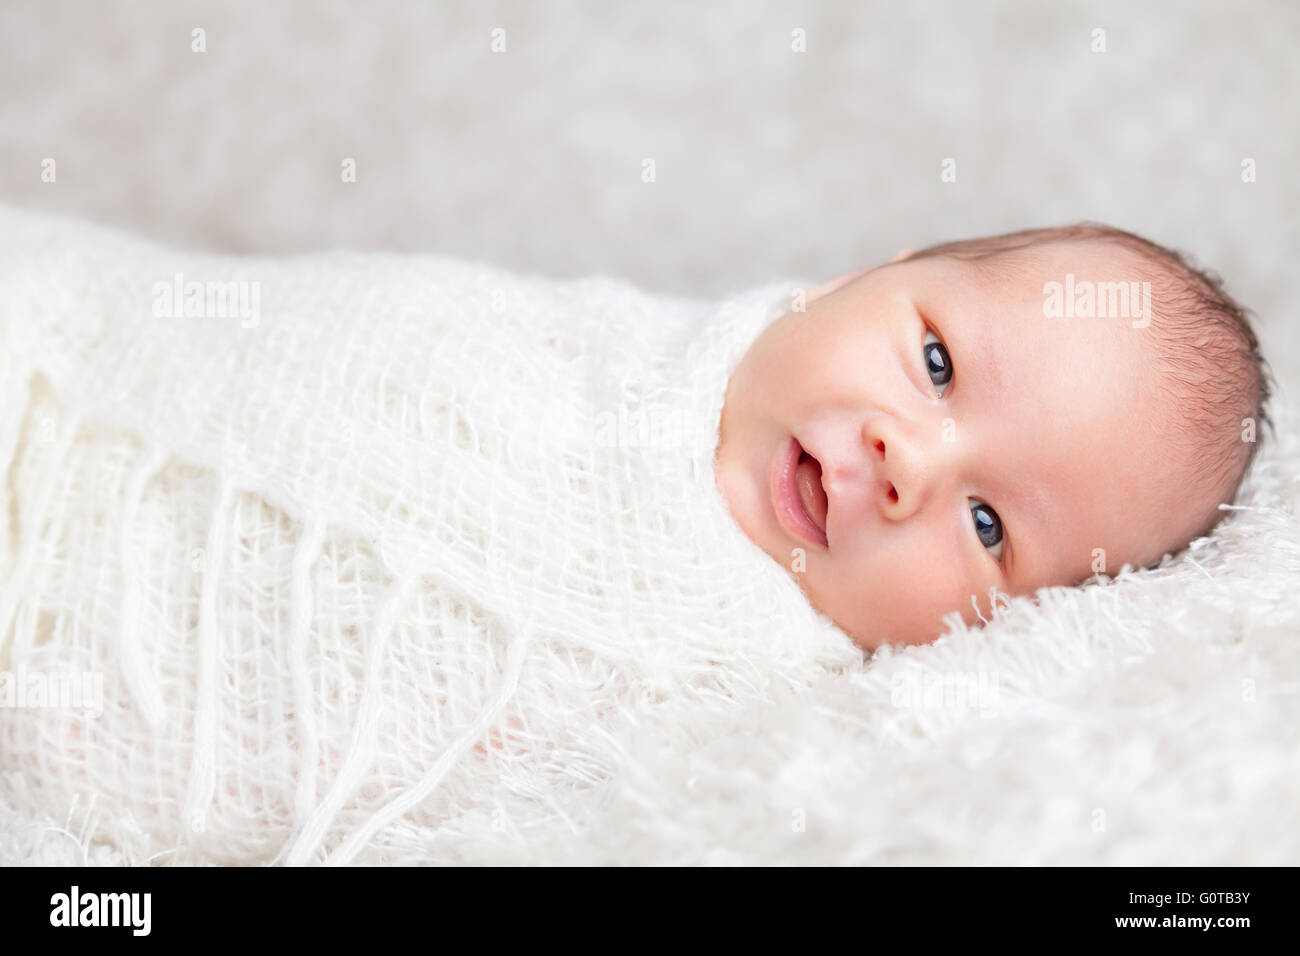 Beautiful newborn baby wrapped in a blanket Stock Photo